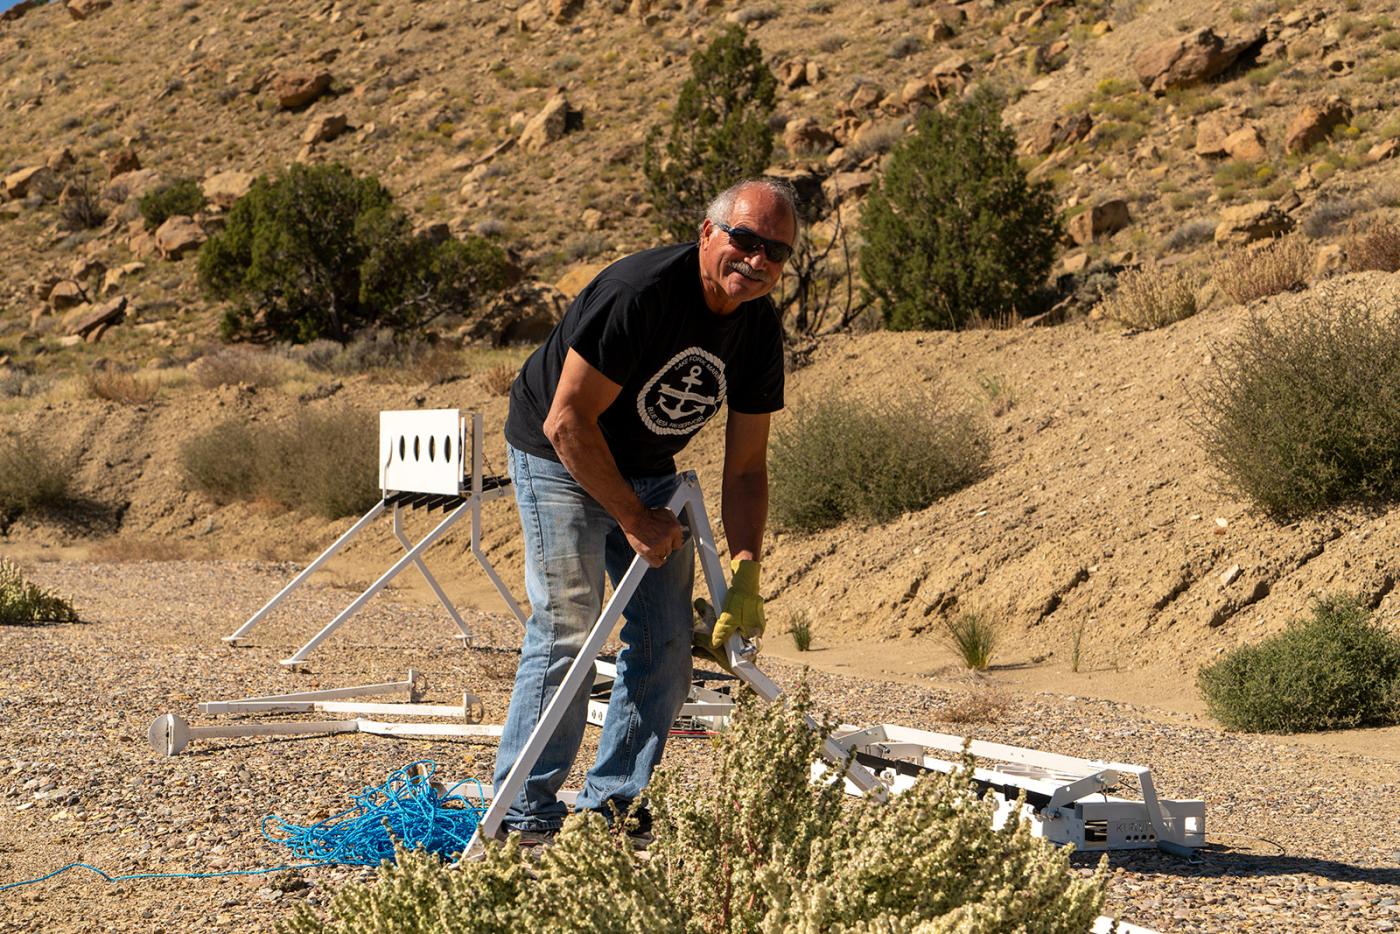 Assembling the summer biathlon range at at Cameo Shooting and Education Complex near Grand Junction, Colorado